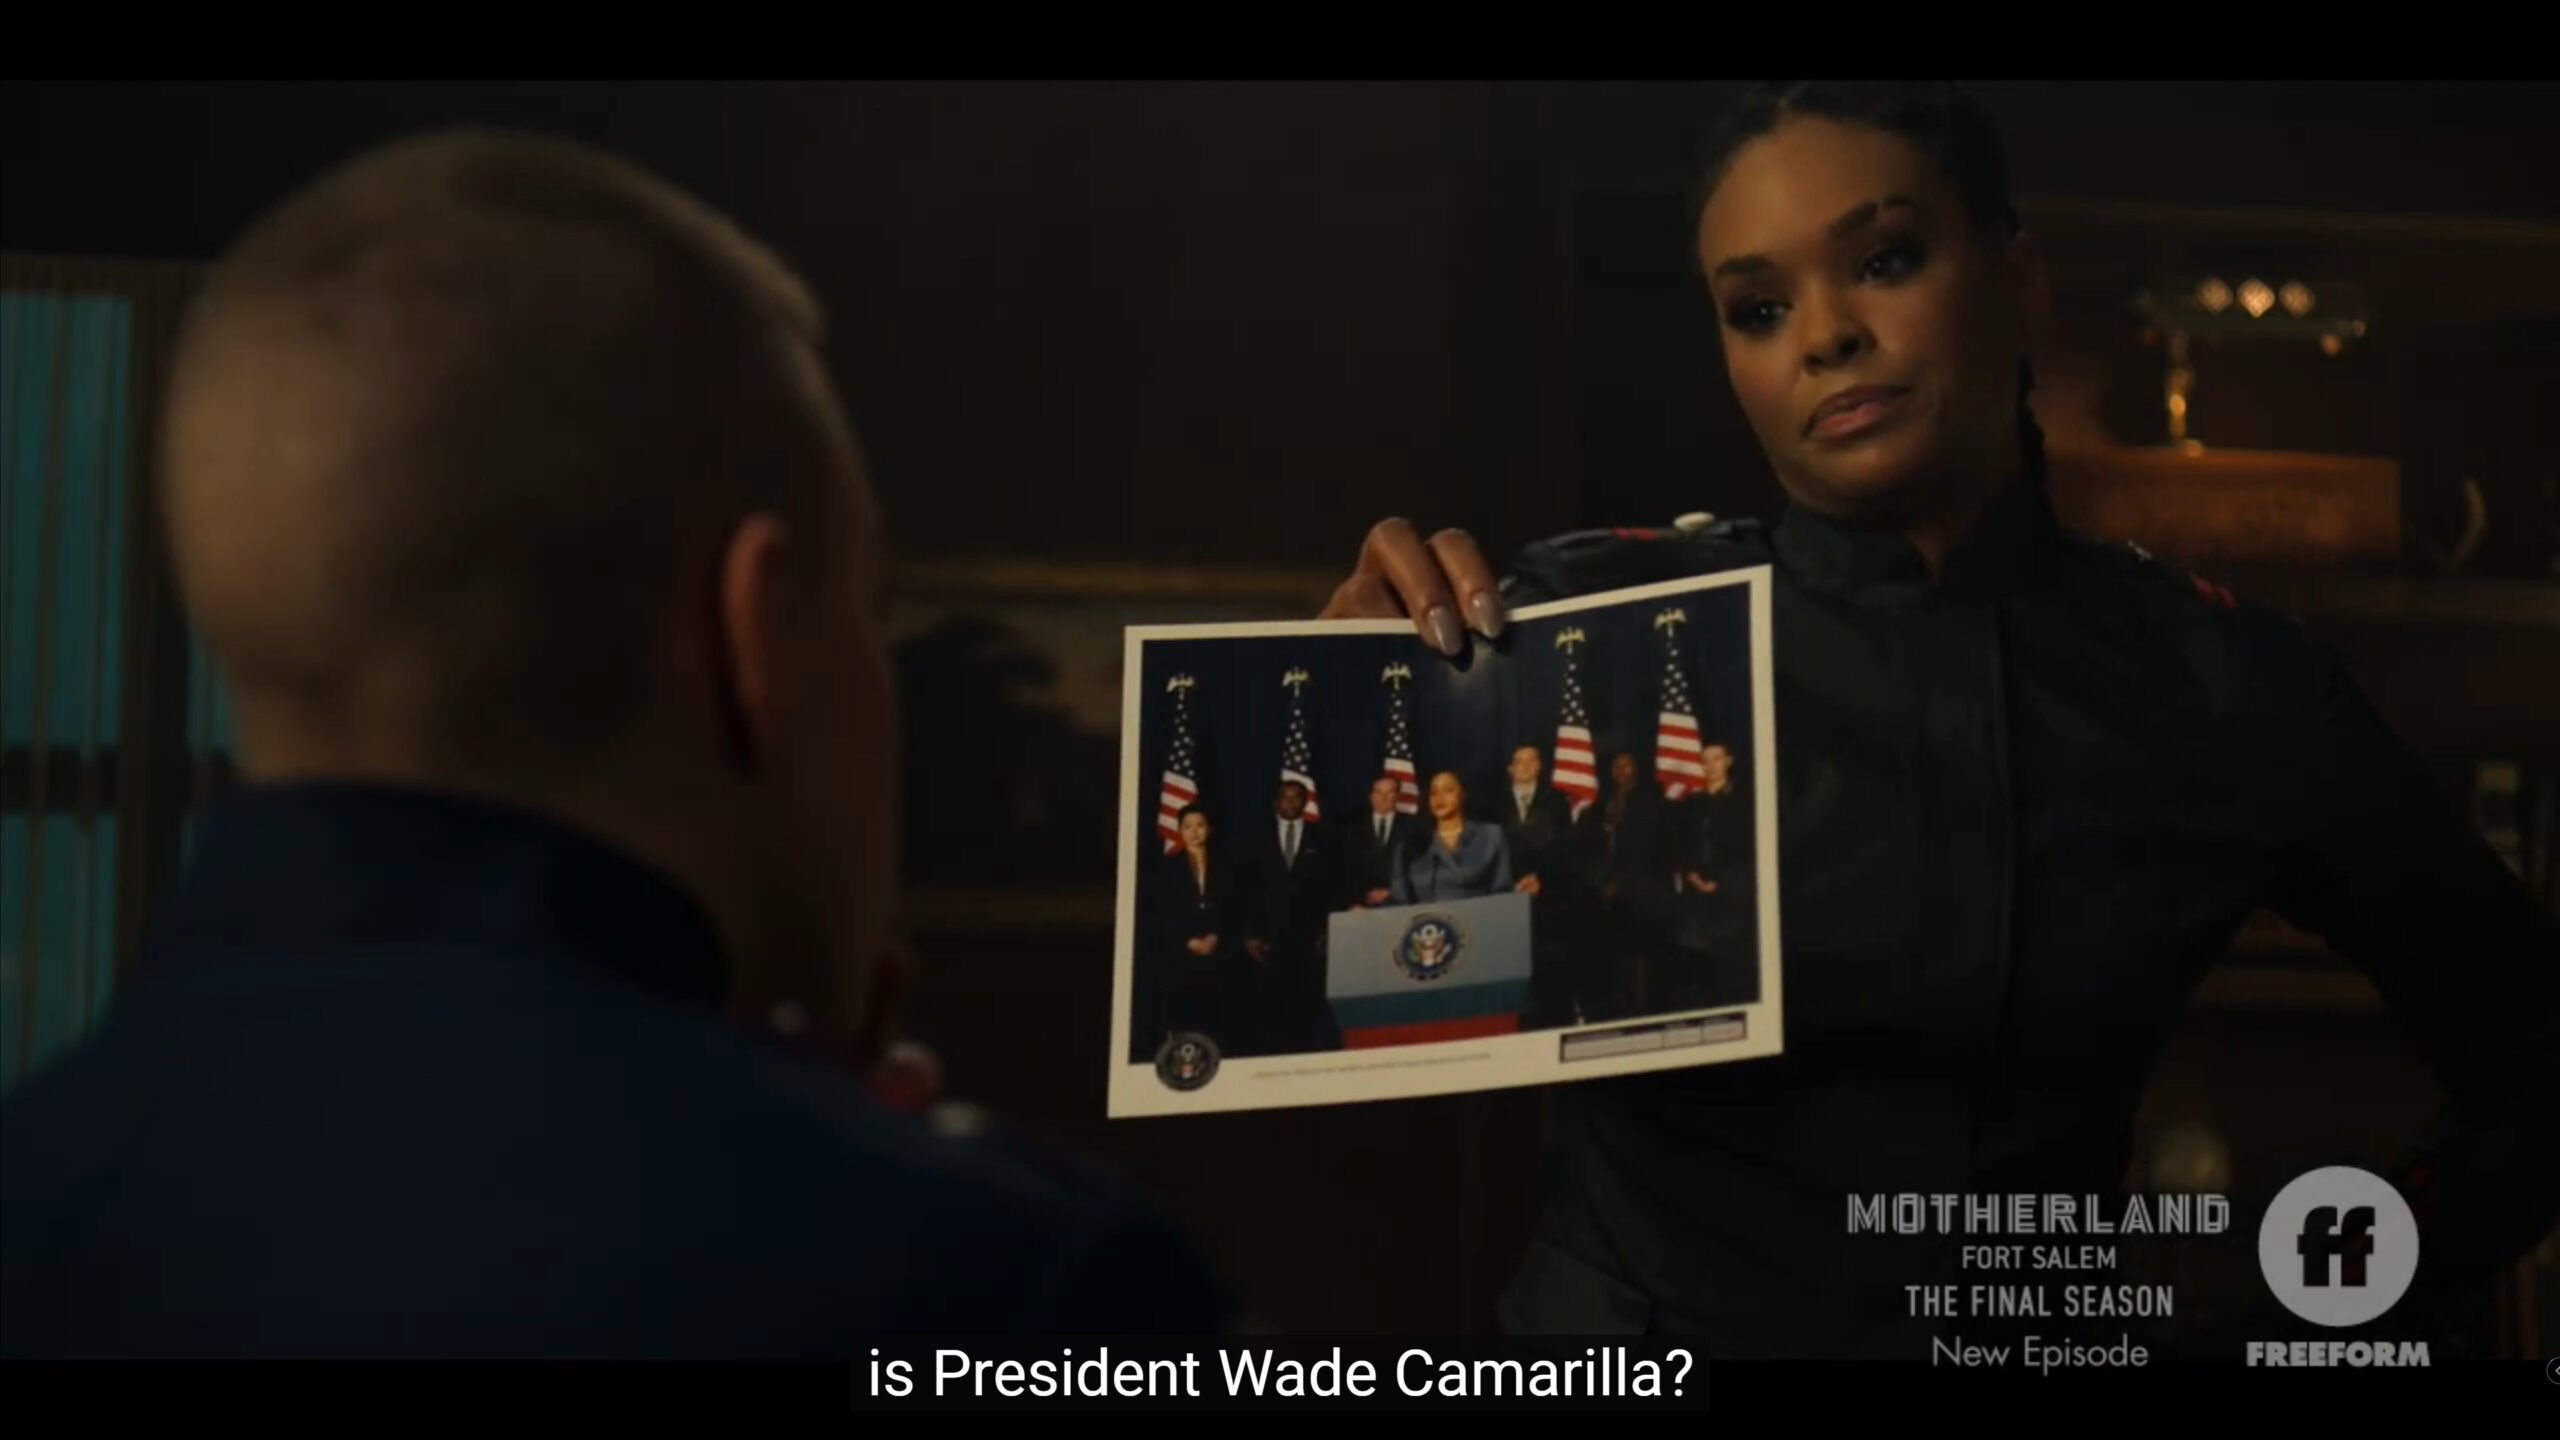 Anacostia questioning whether President Wade is a member of the Camarilla